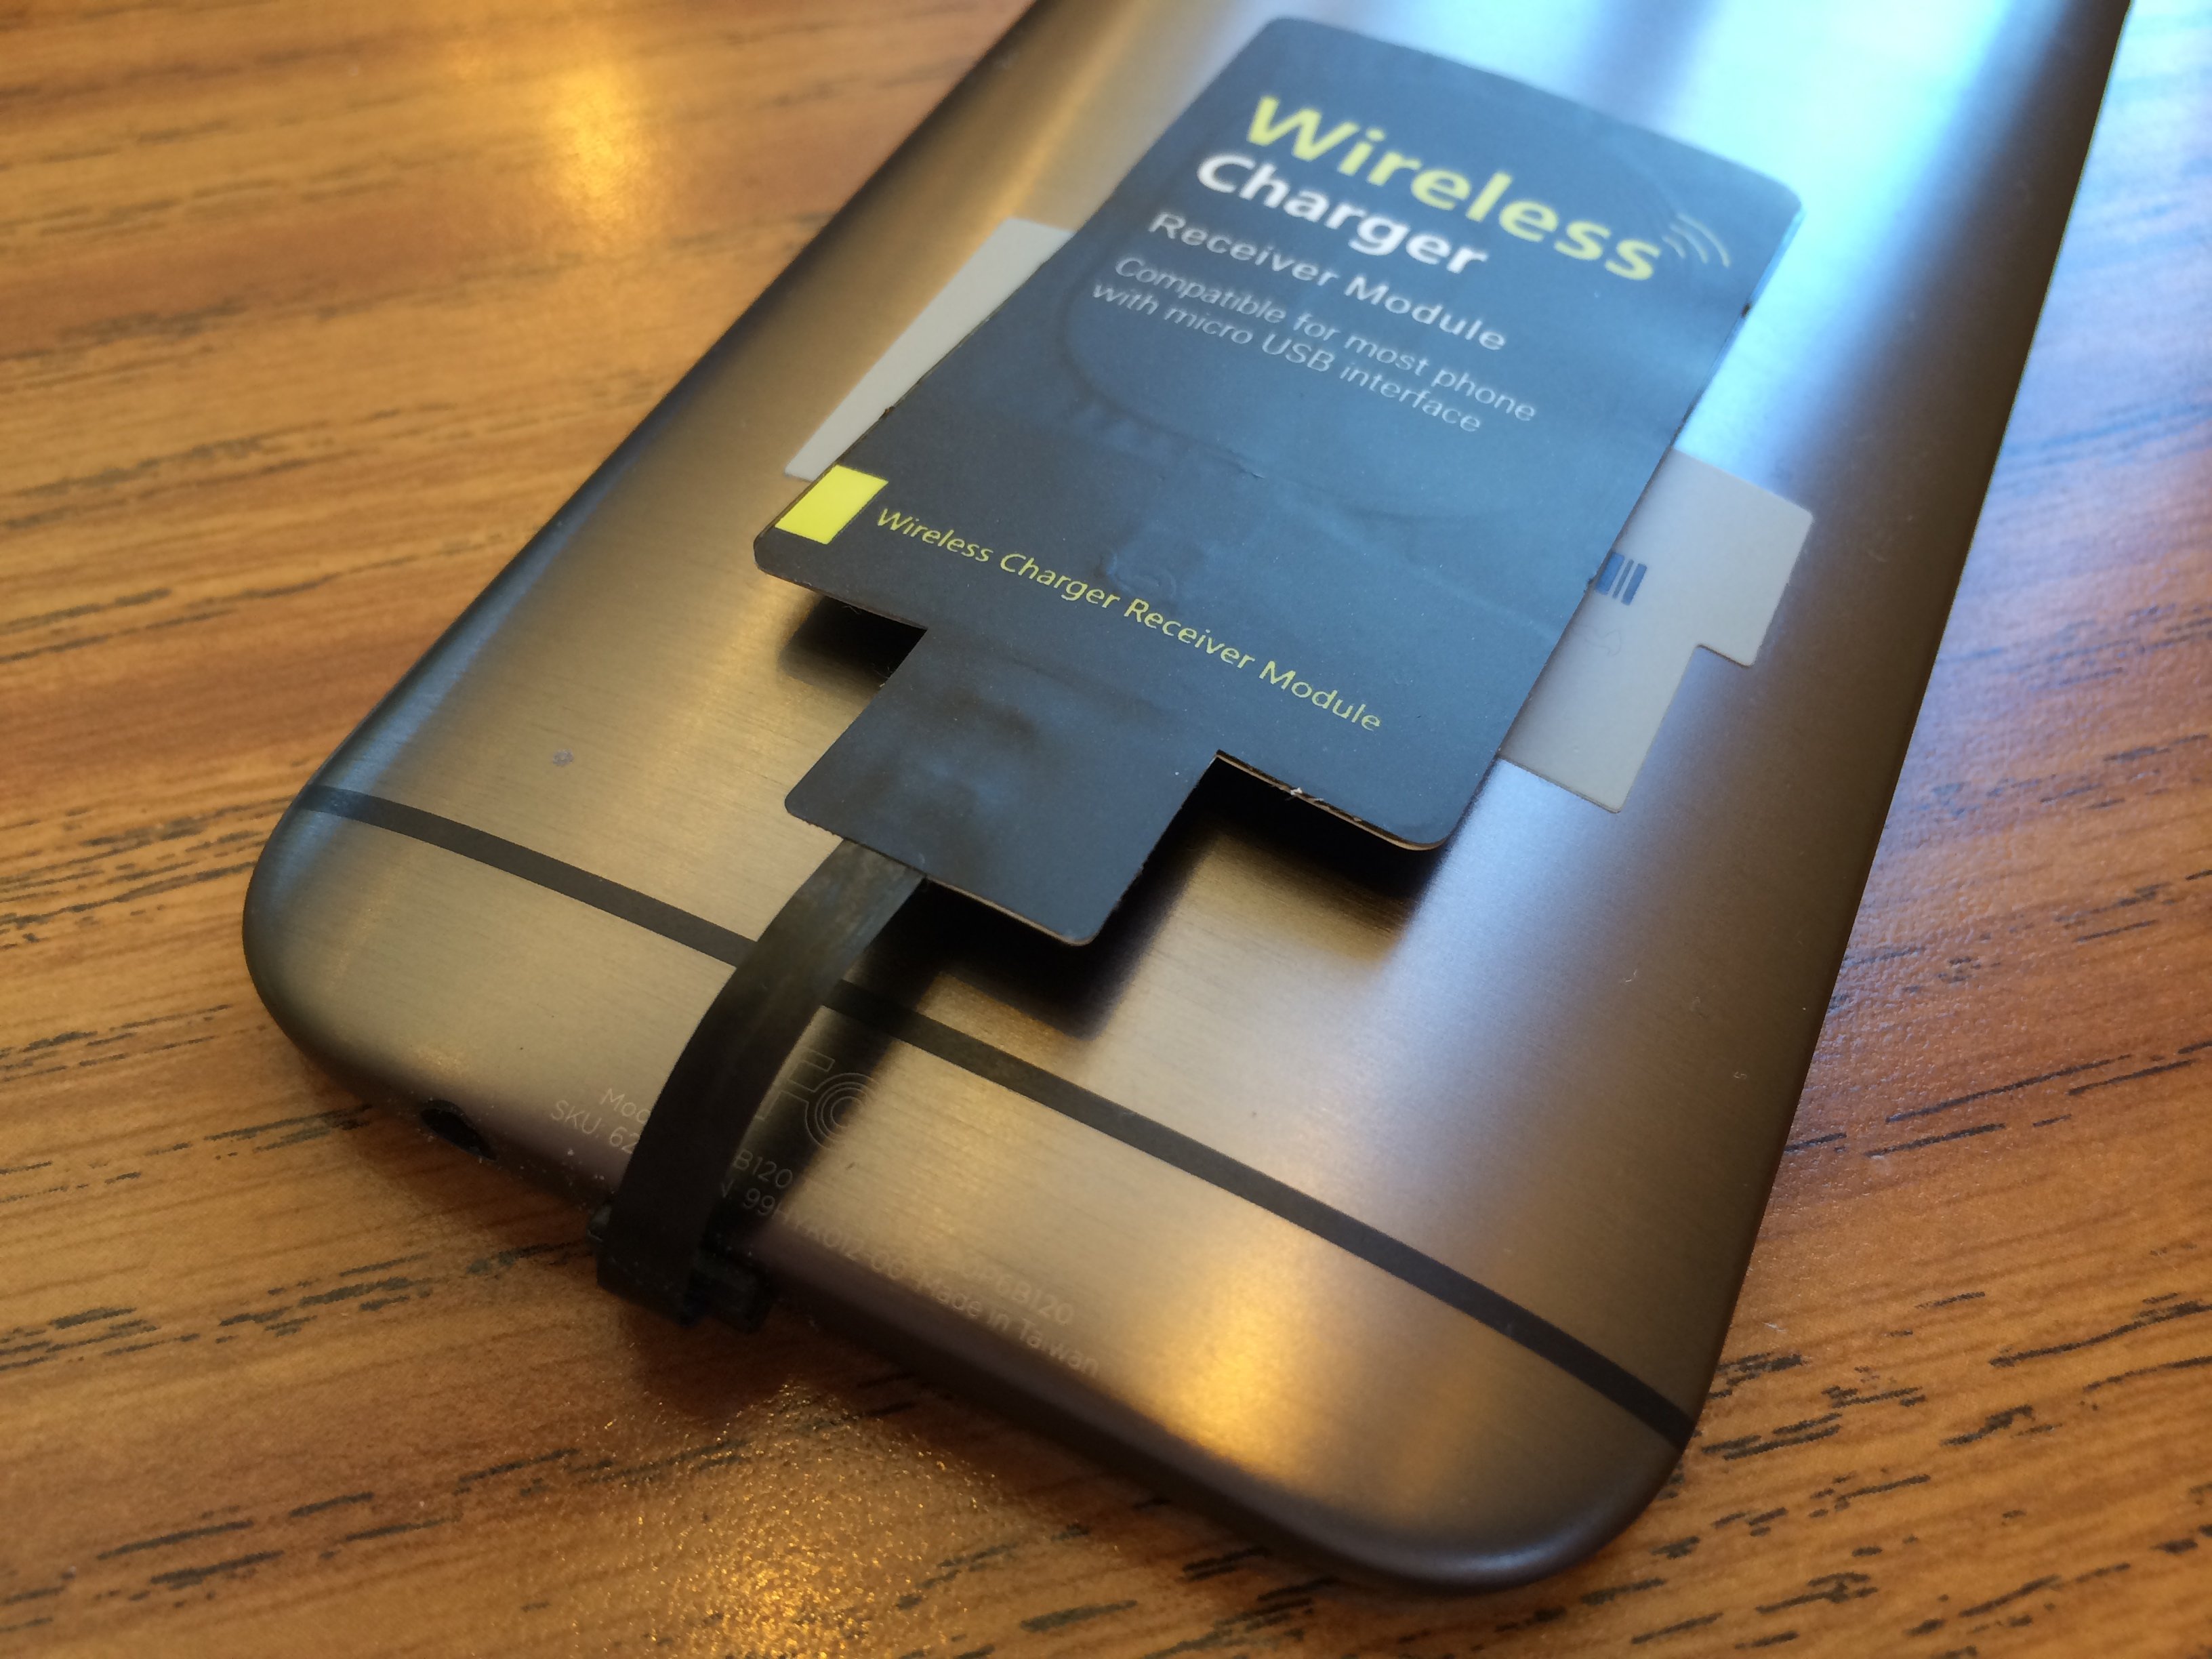 qi-enabled wirelss charging film on htc one m8